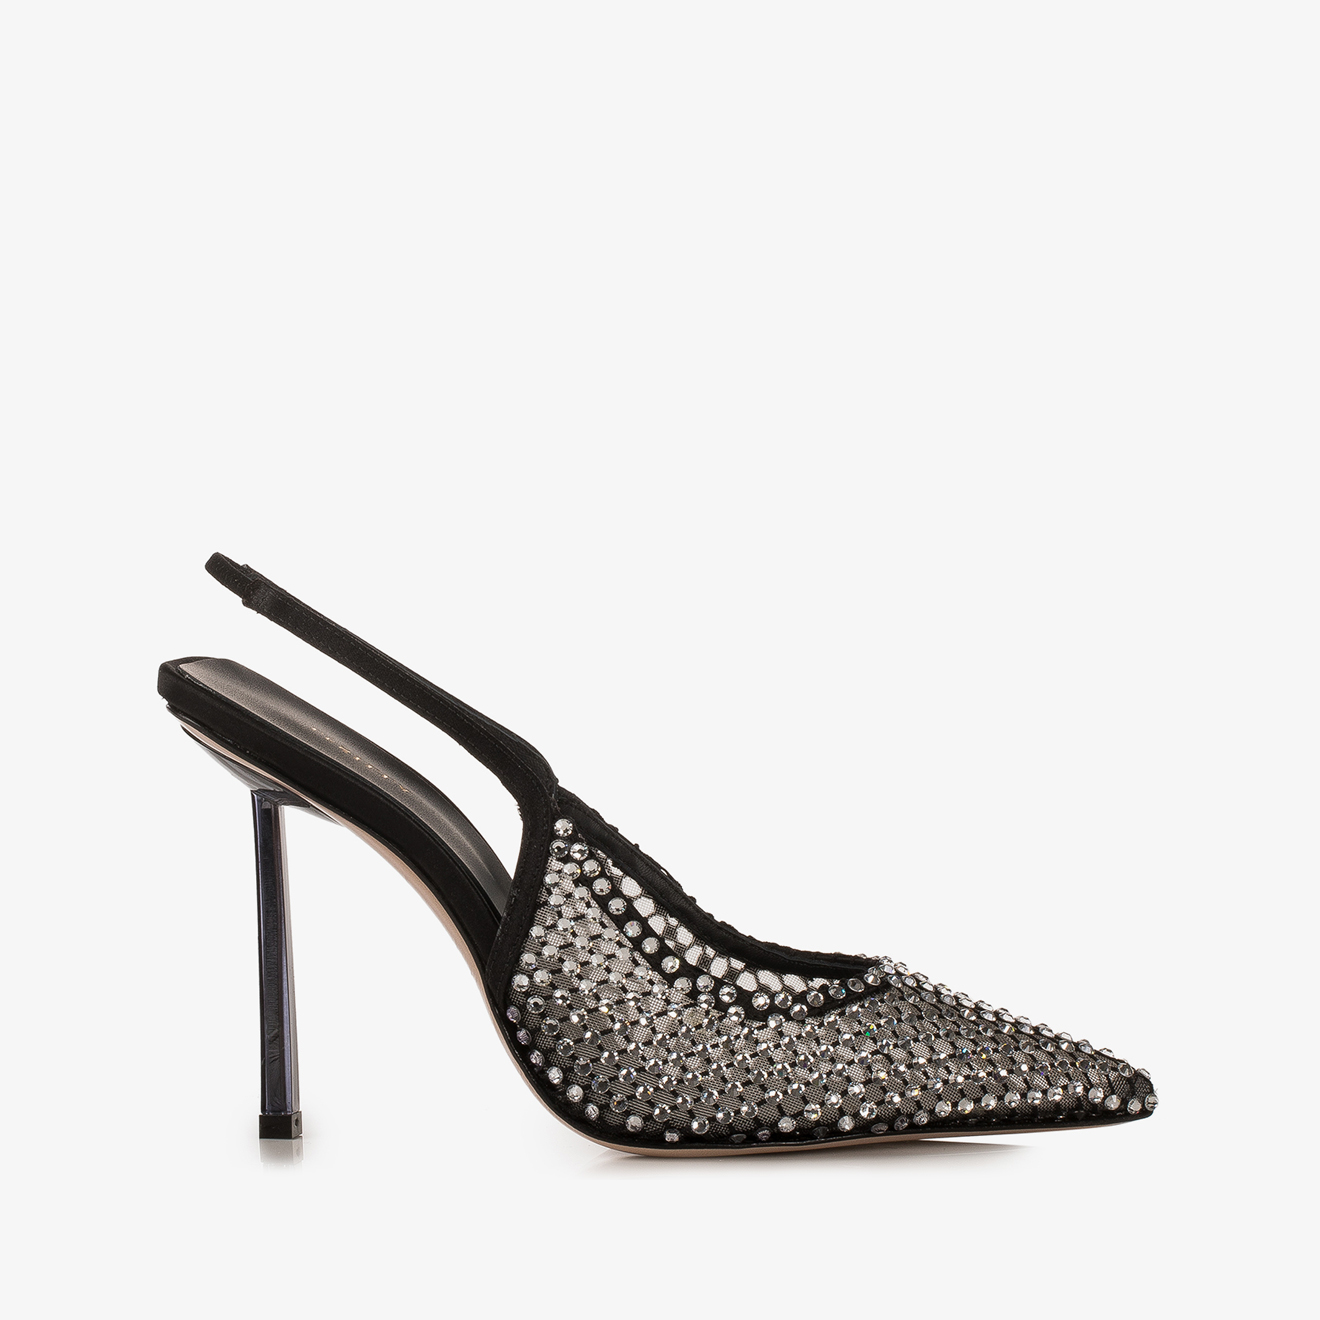 Black fishnet slingback with Crystals - Le Silla